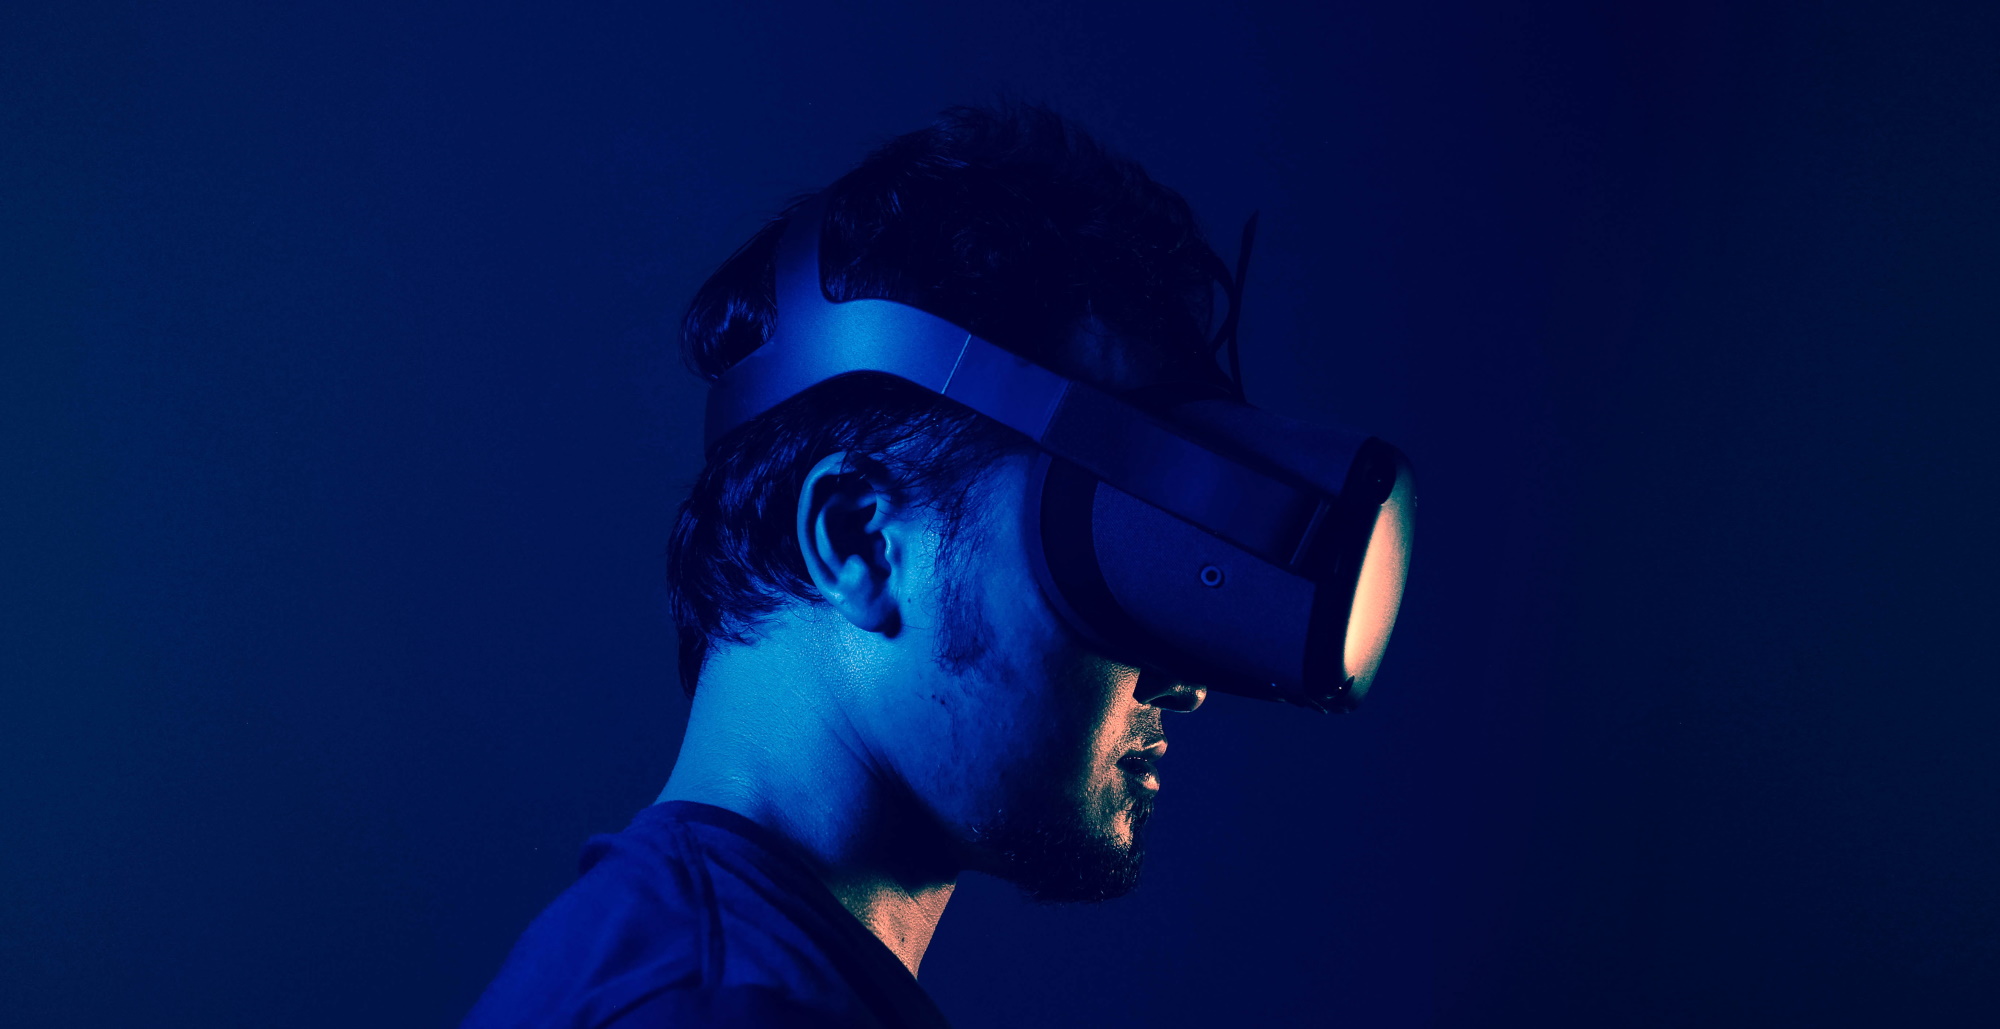 male wearing a VR headset in a blue room with blue lighting